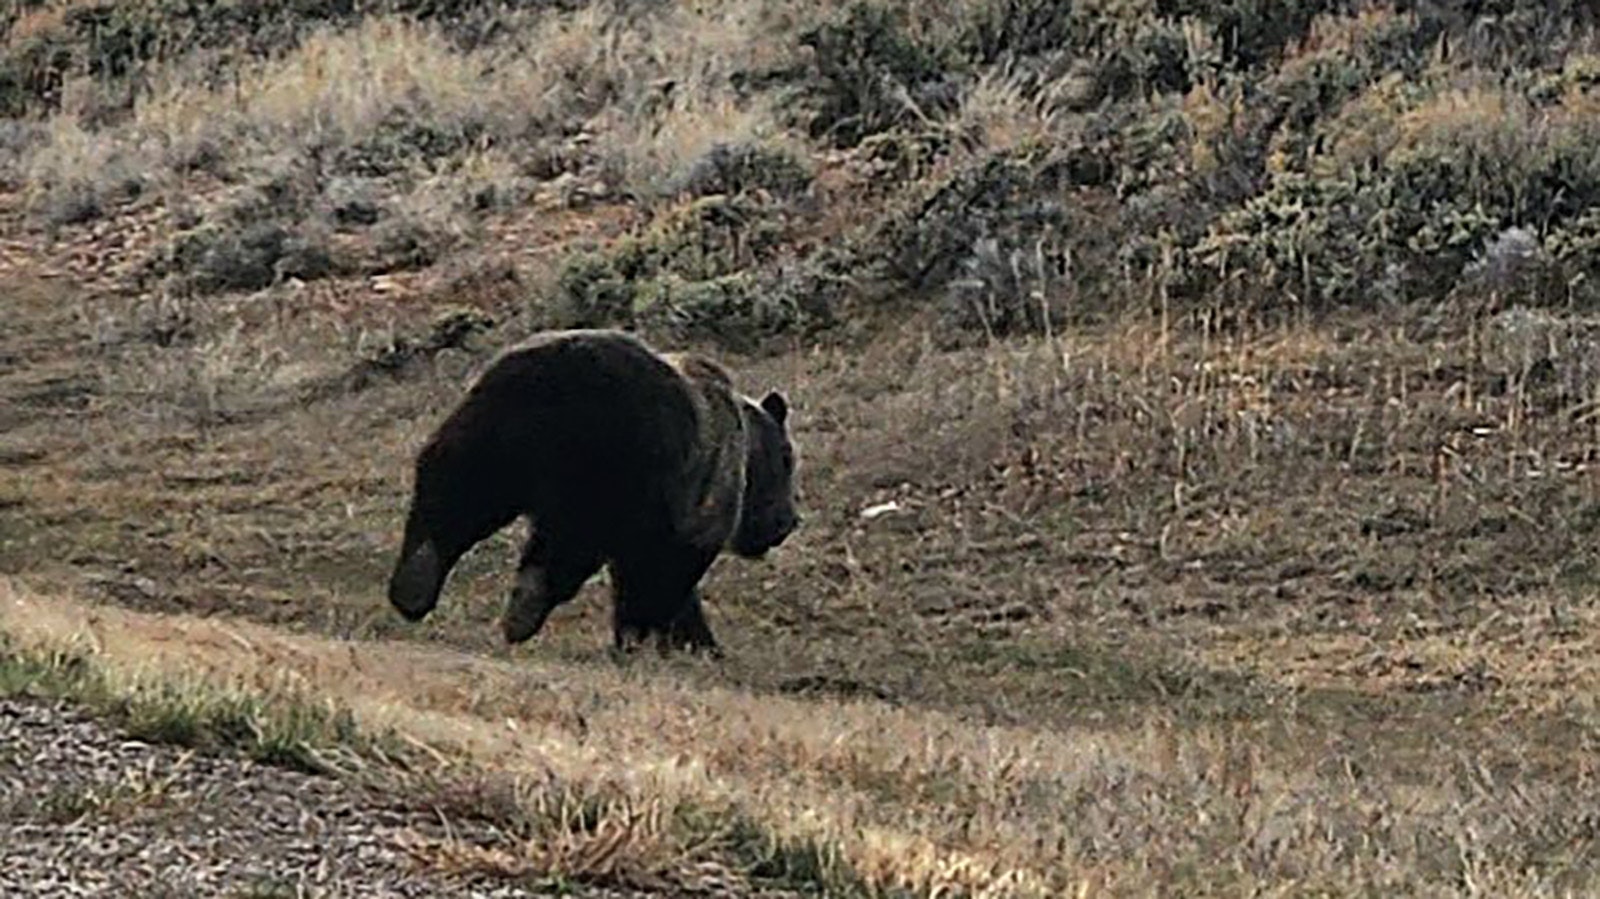 Lincoln County Sheriff’s Deputy Caleb Ellis got some photos during a rare encounter with a grizzly bear near Kemmerer on Thursday afternoon.